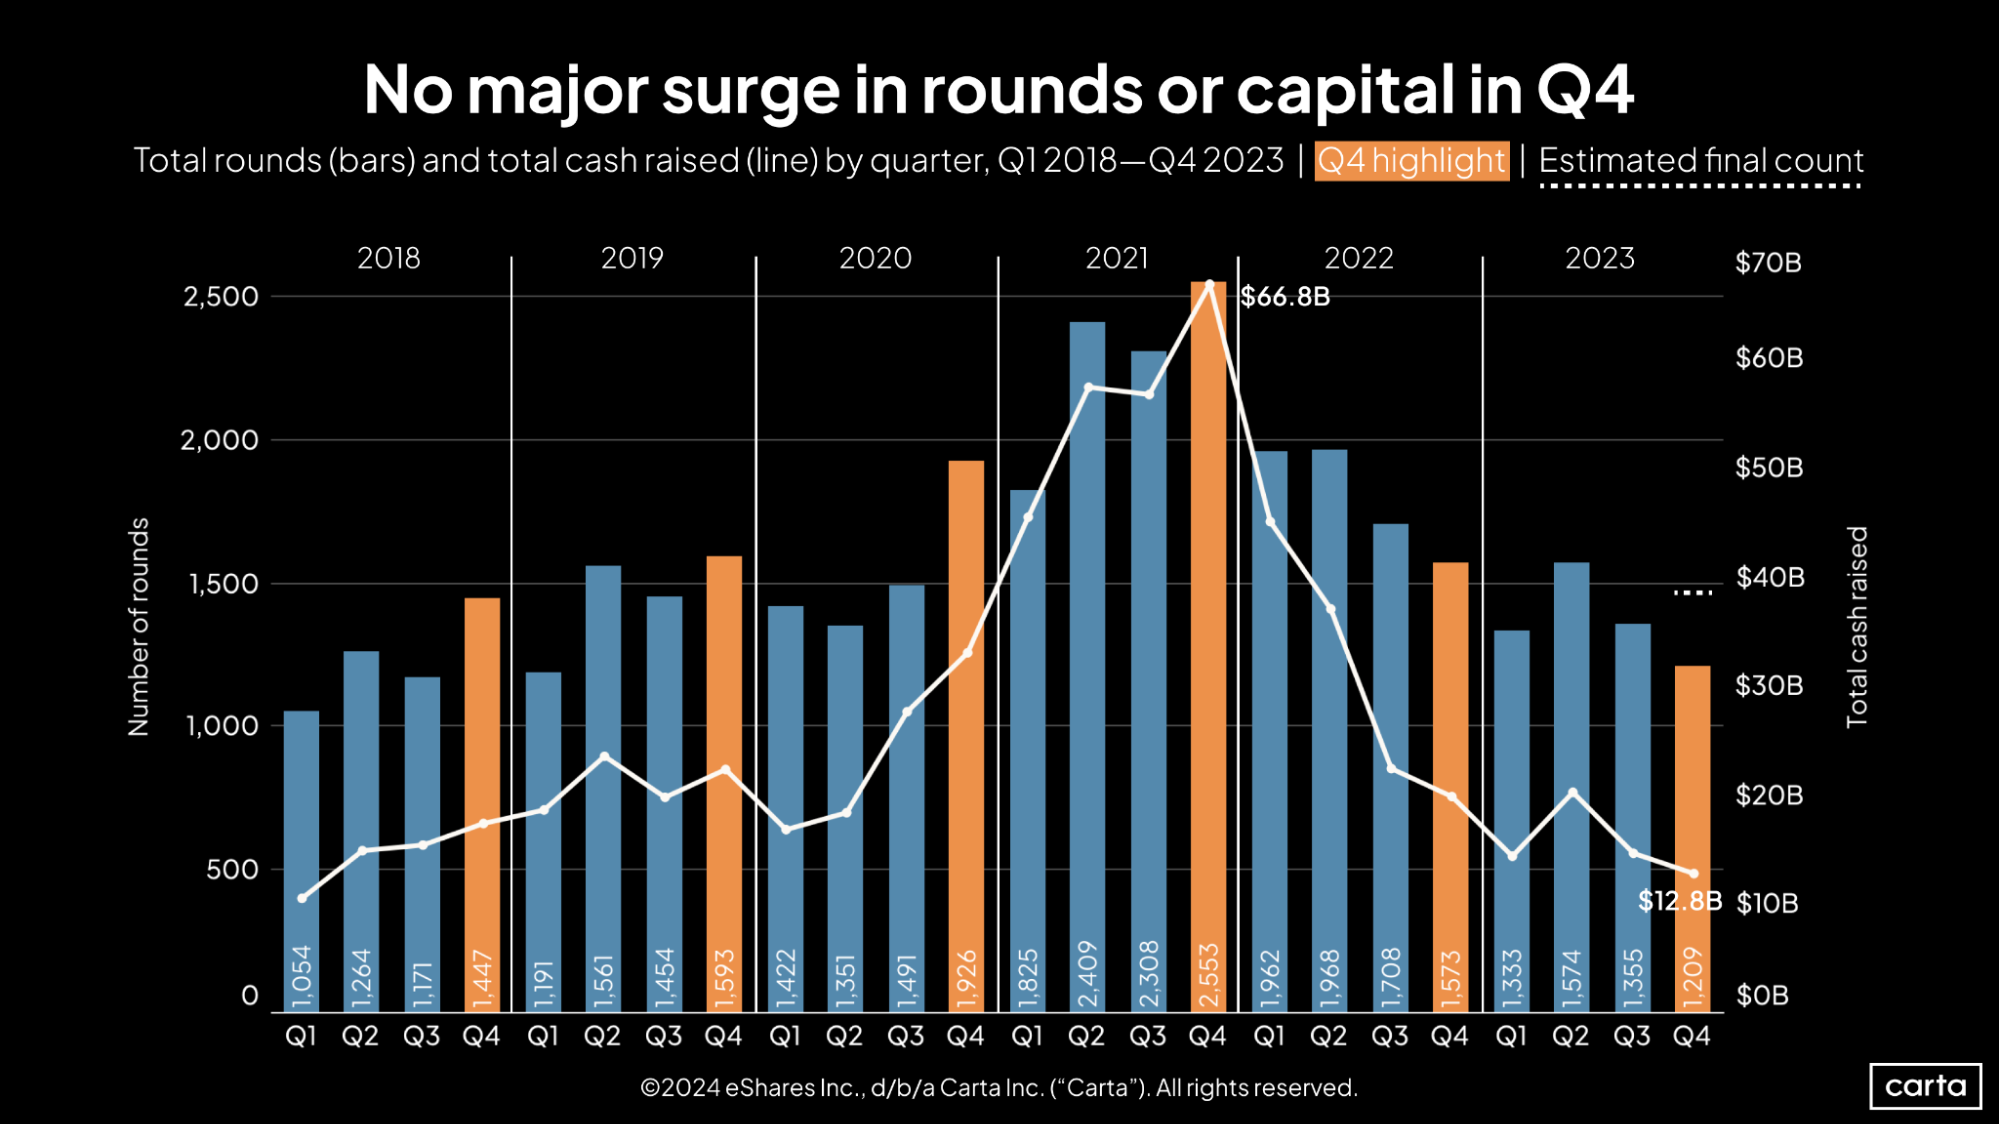 Carta SOPM Q4 2023_No major surge in rounds or capital in Q4